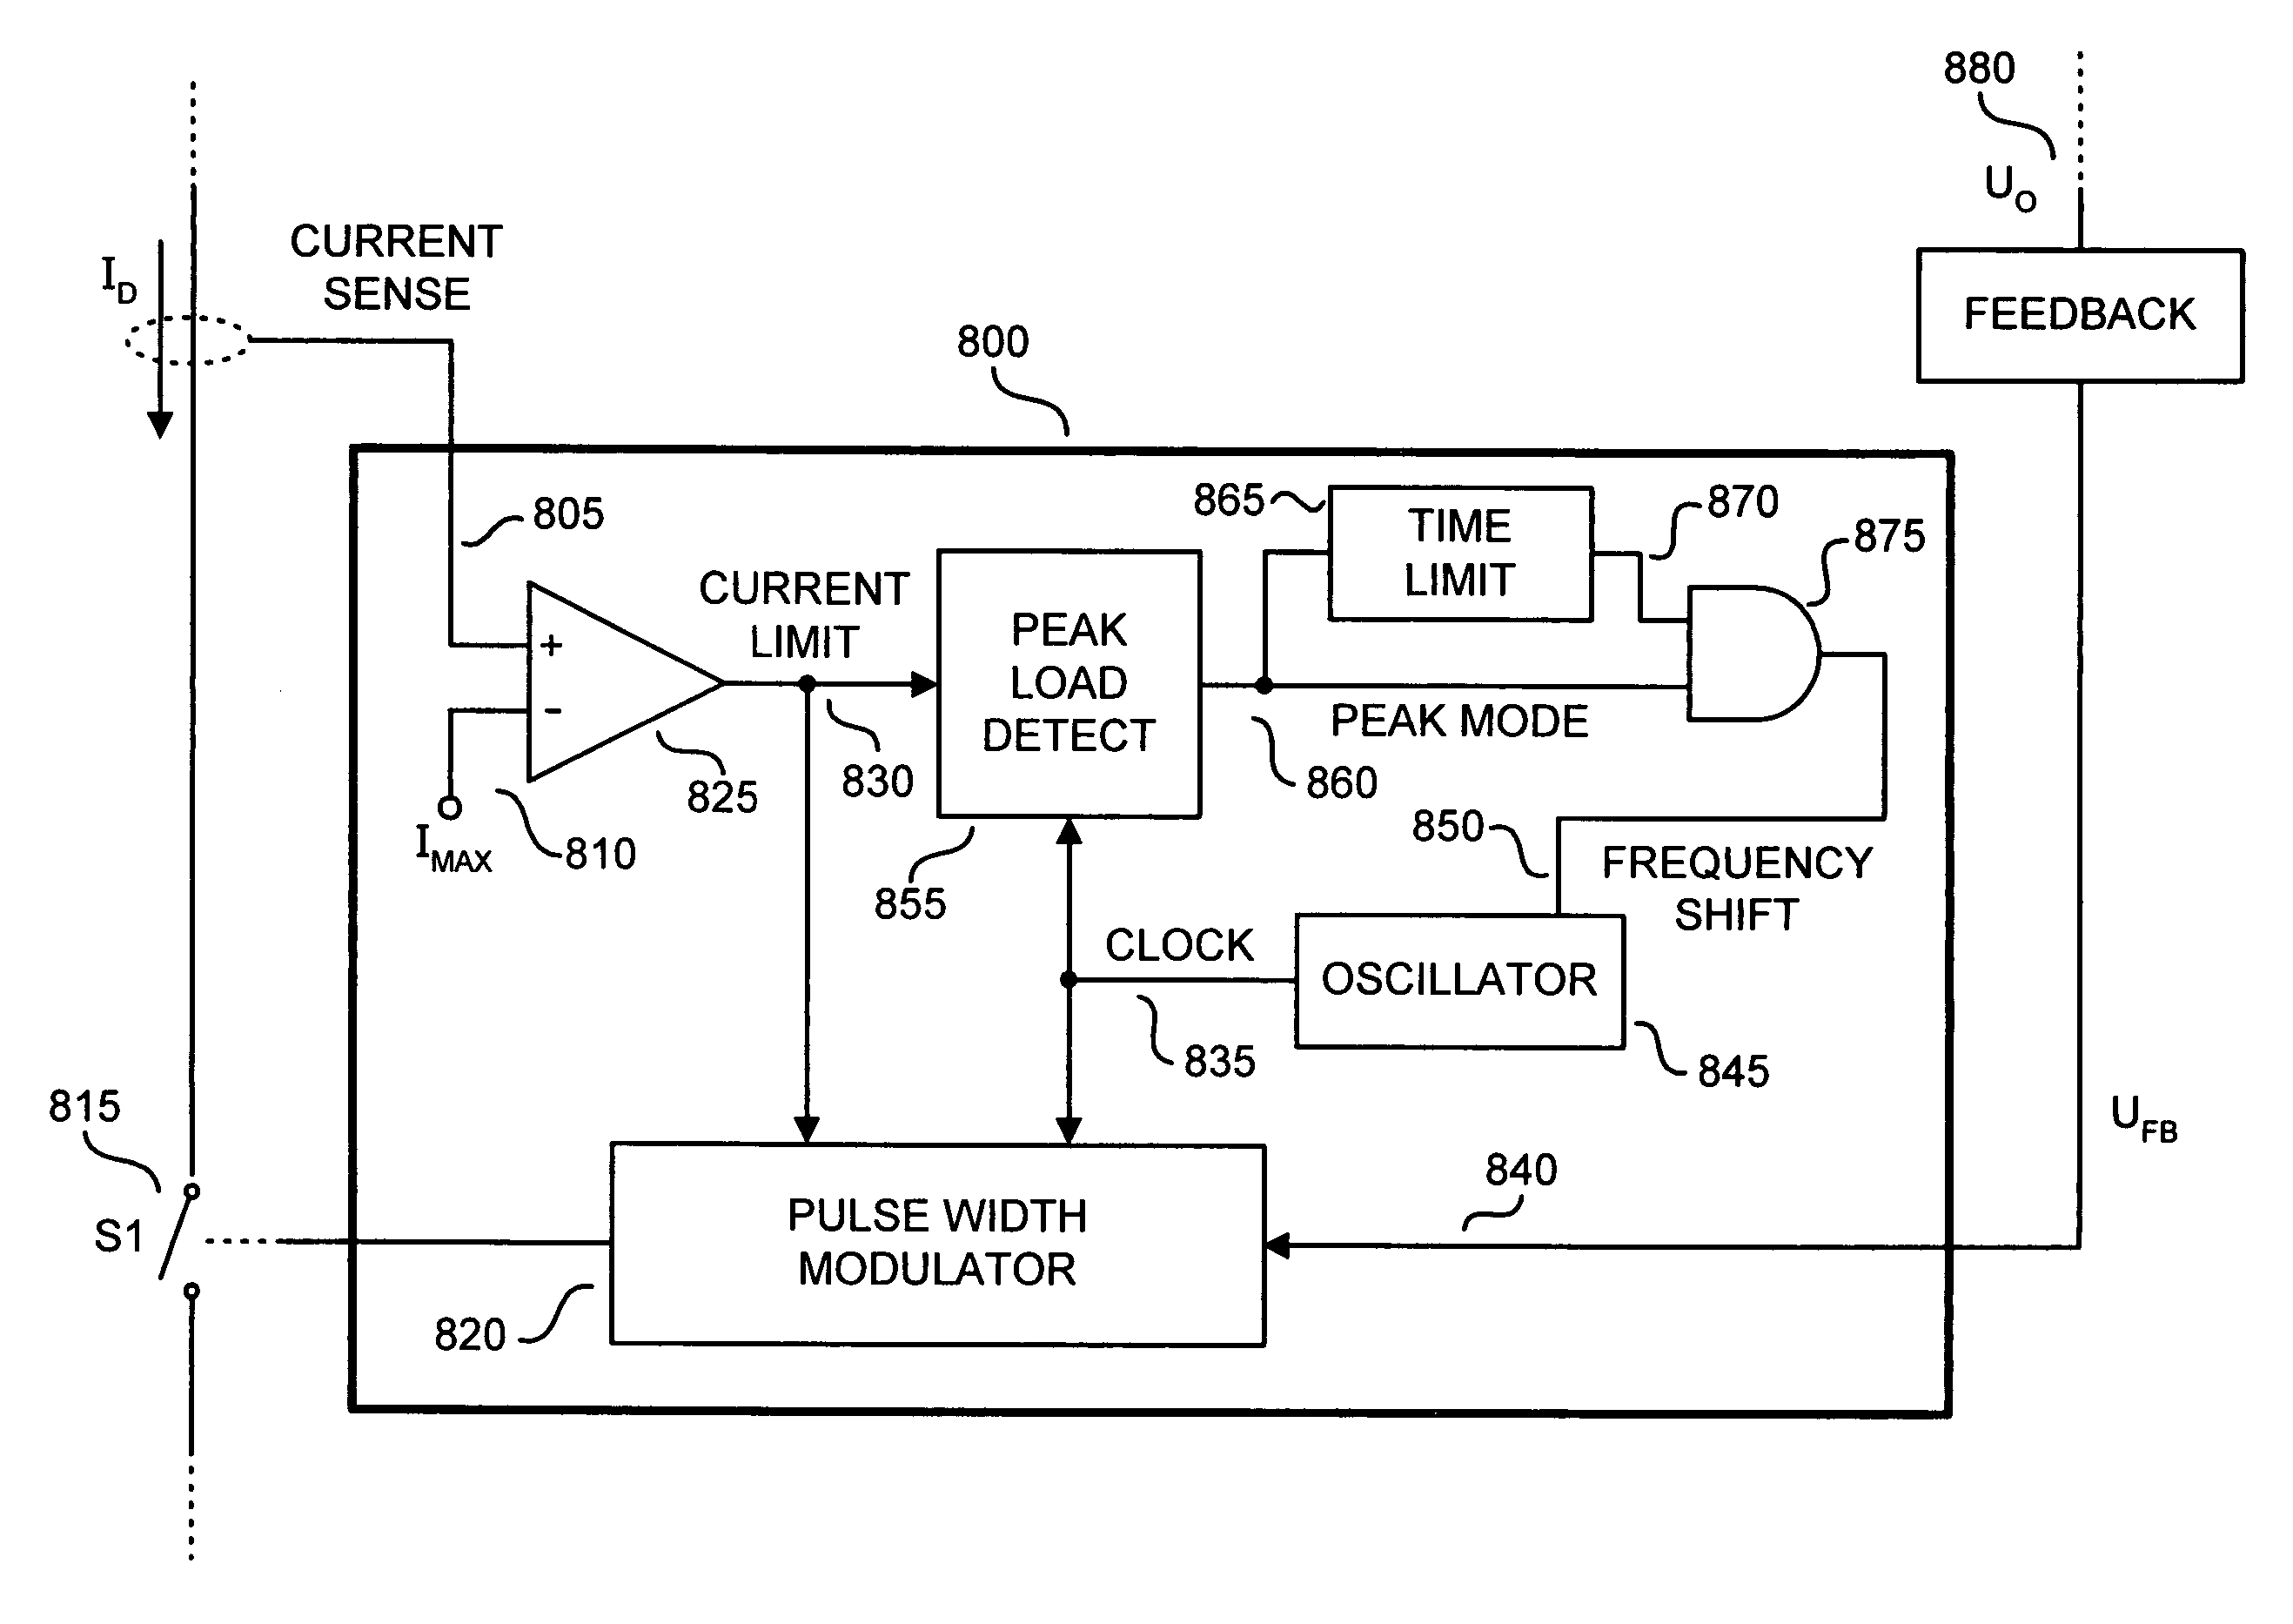 Method and apparatus to provide temporary peak power from a switching regulator